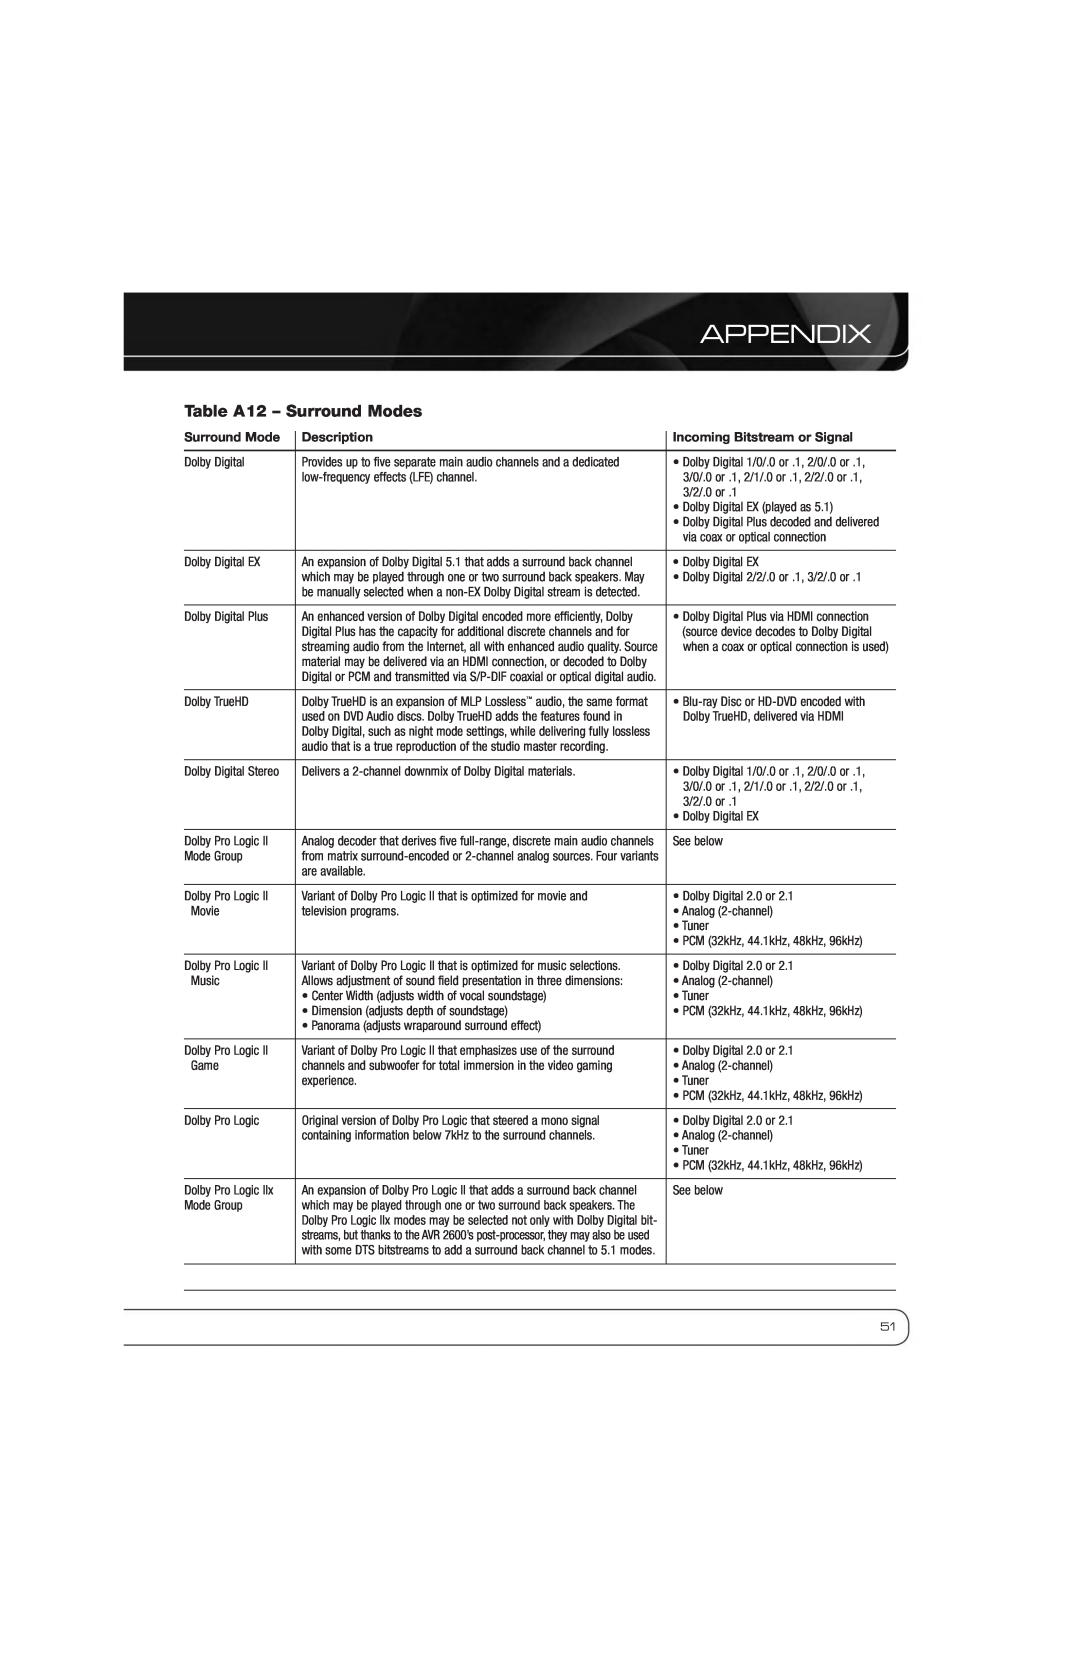 Harman AVR 2600 owner manual Table A12 - Surround Modes, Appendix, Description, Incoming Bitstream or Signal 